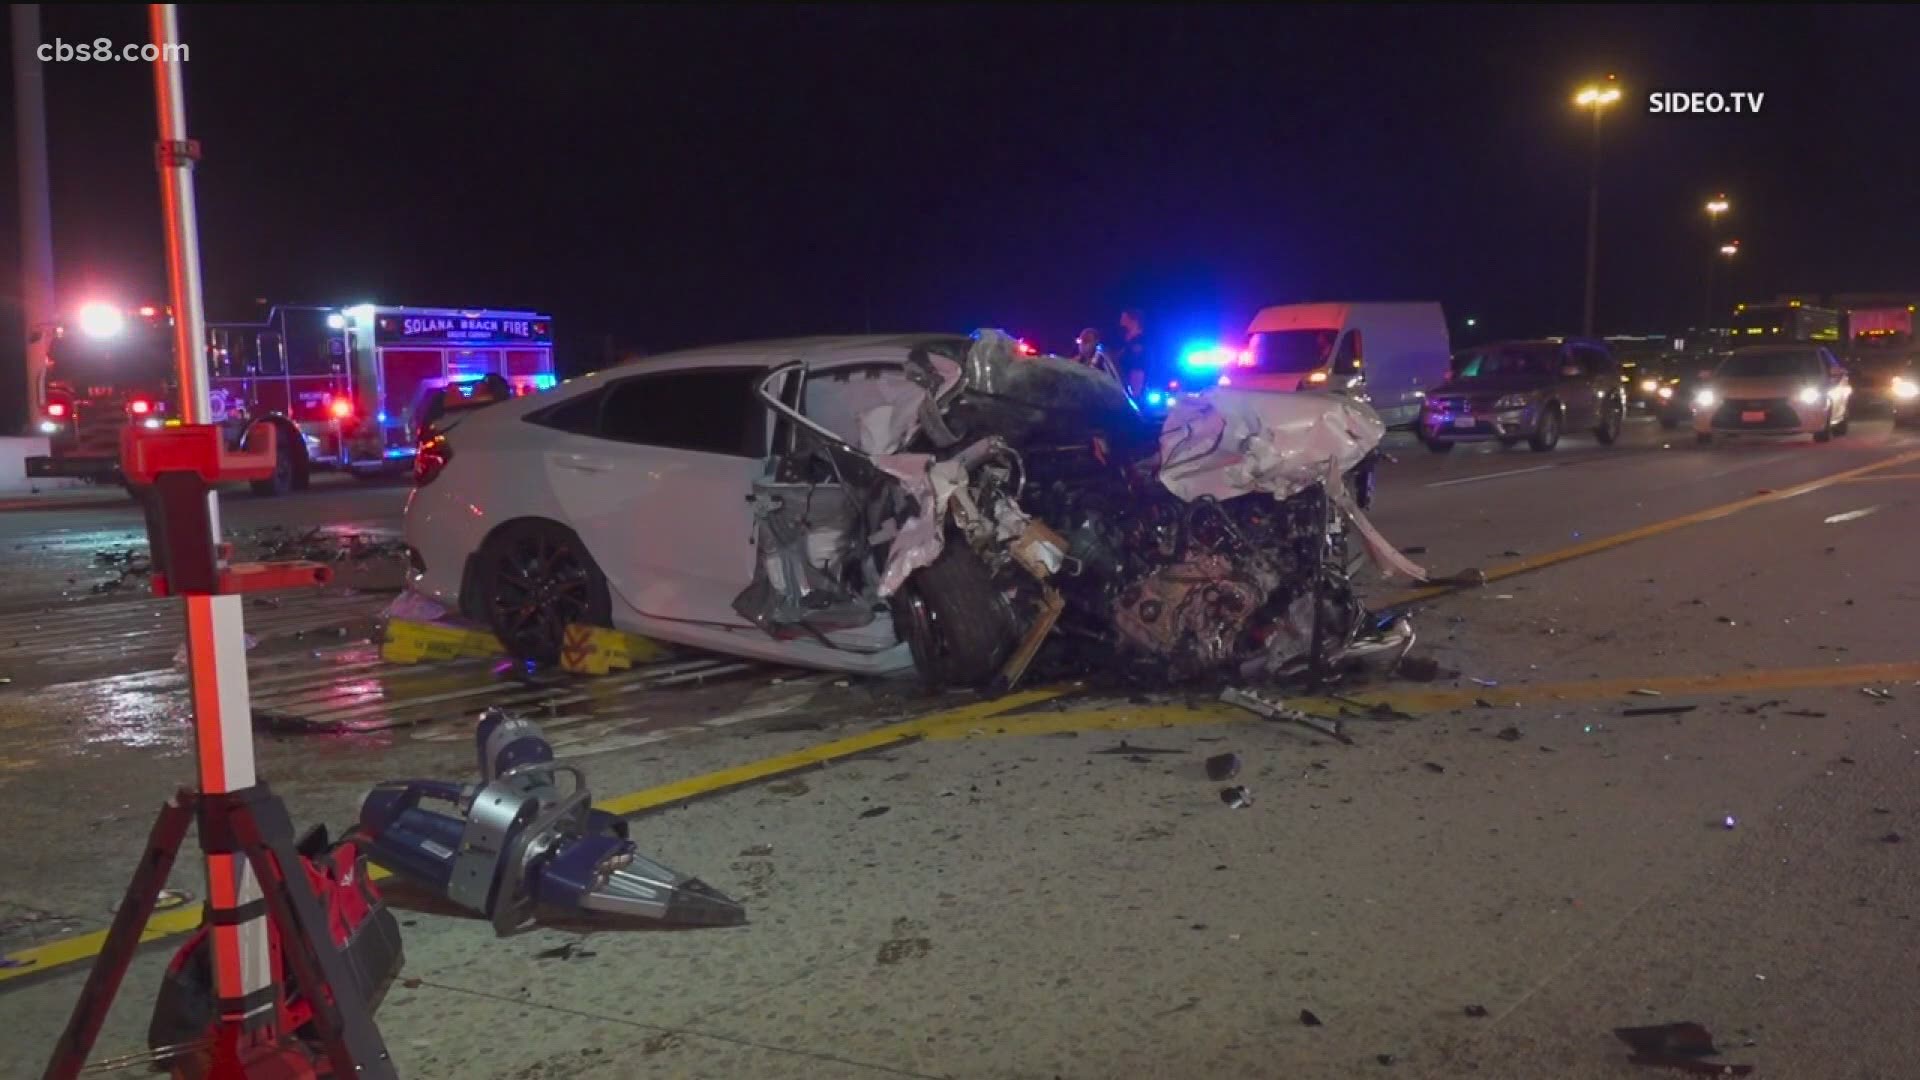 The crash was reported at 12:49 a.m. on the southbound San Diego Freeway at Carmel Valley Road, according to the California Highway Patrol.